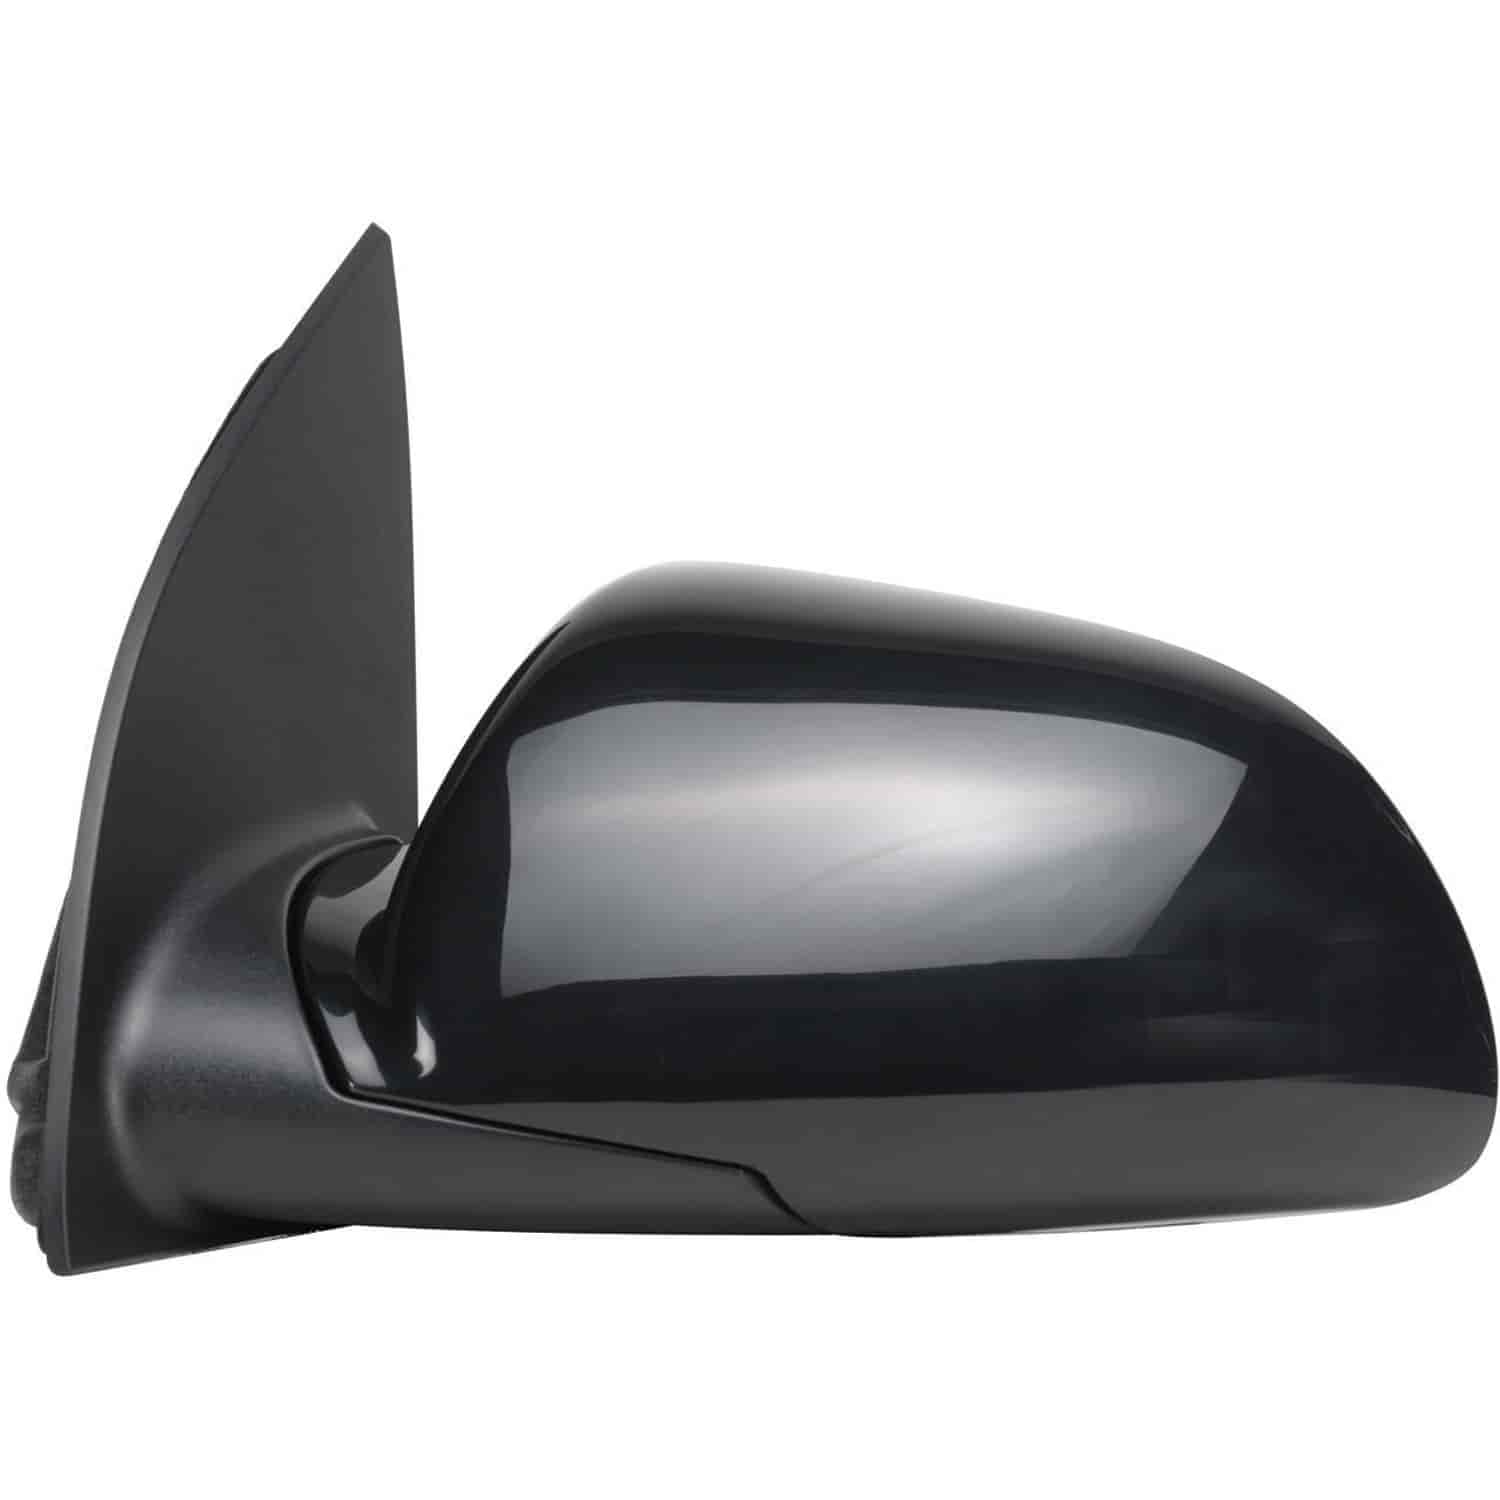 OEM Style Replacement mirror for 04-09 Saturn VueP.m. ; Chevy Equinox Pontiac Torrent driver side mi